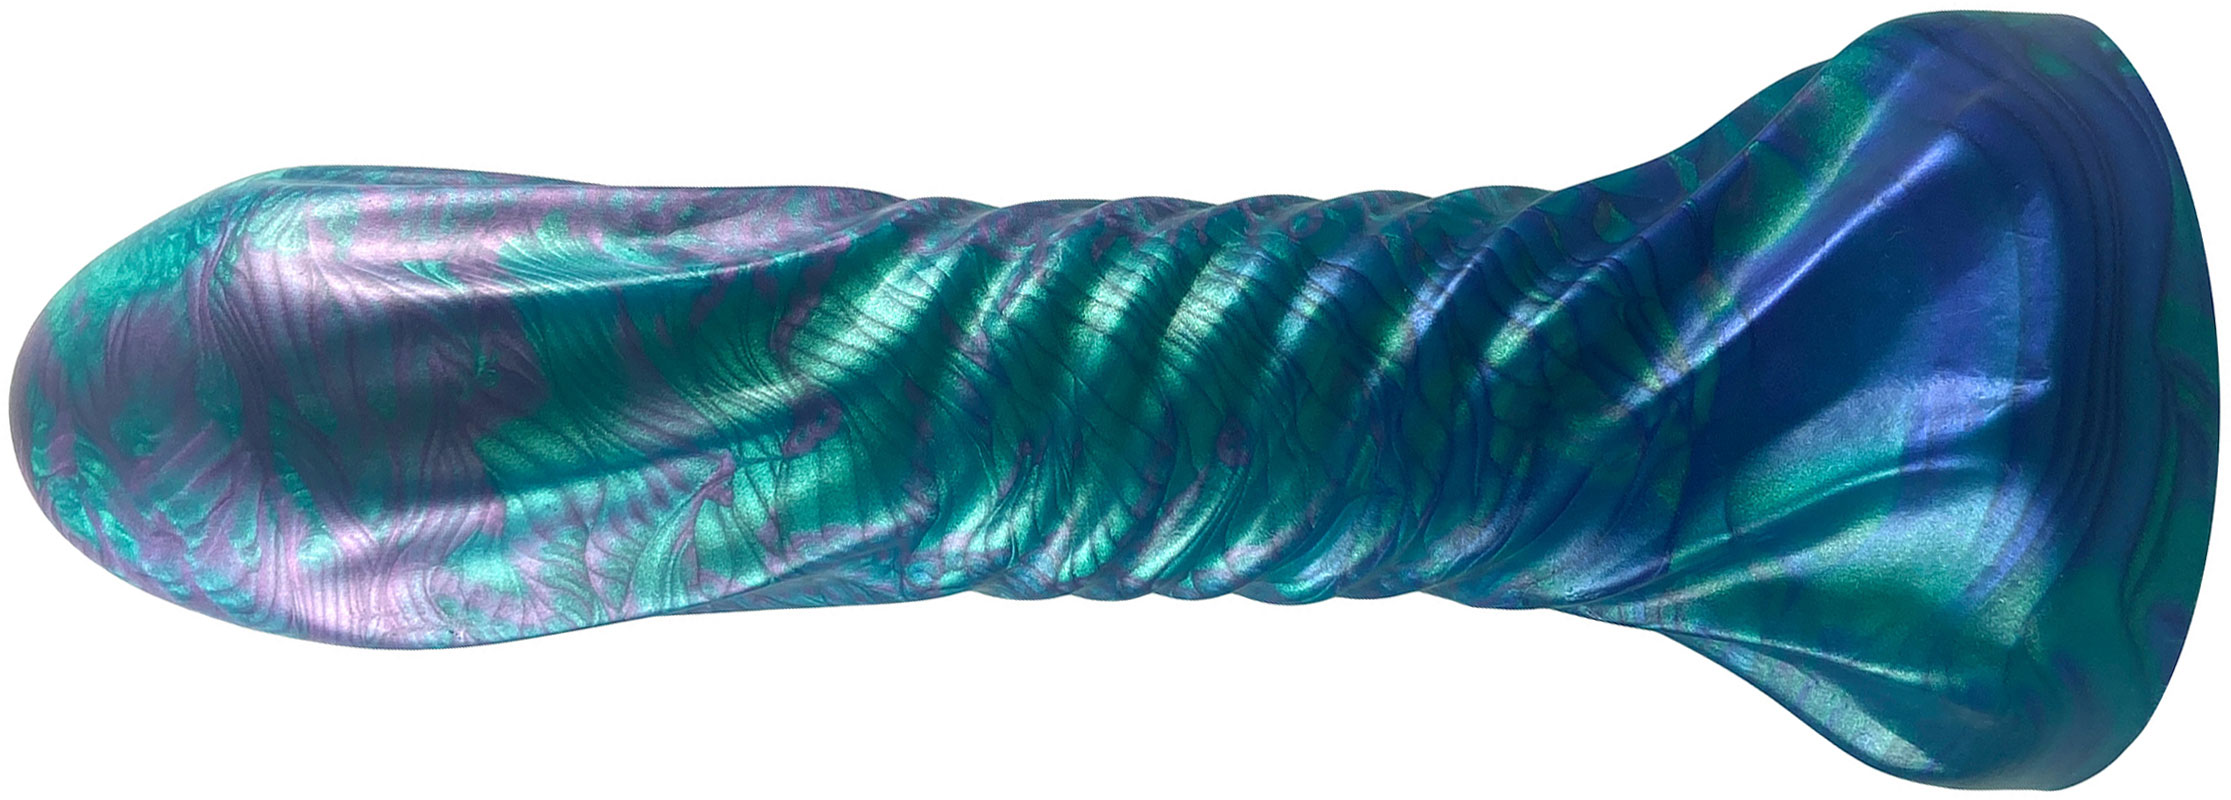 Helios Silicone Fantasy Dildo By Uberrime - Side View